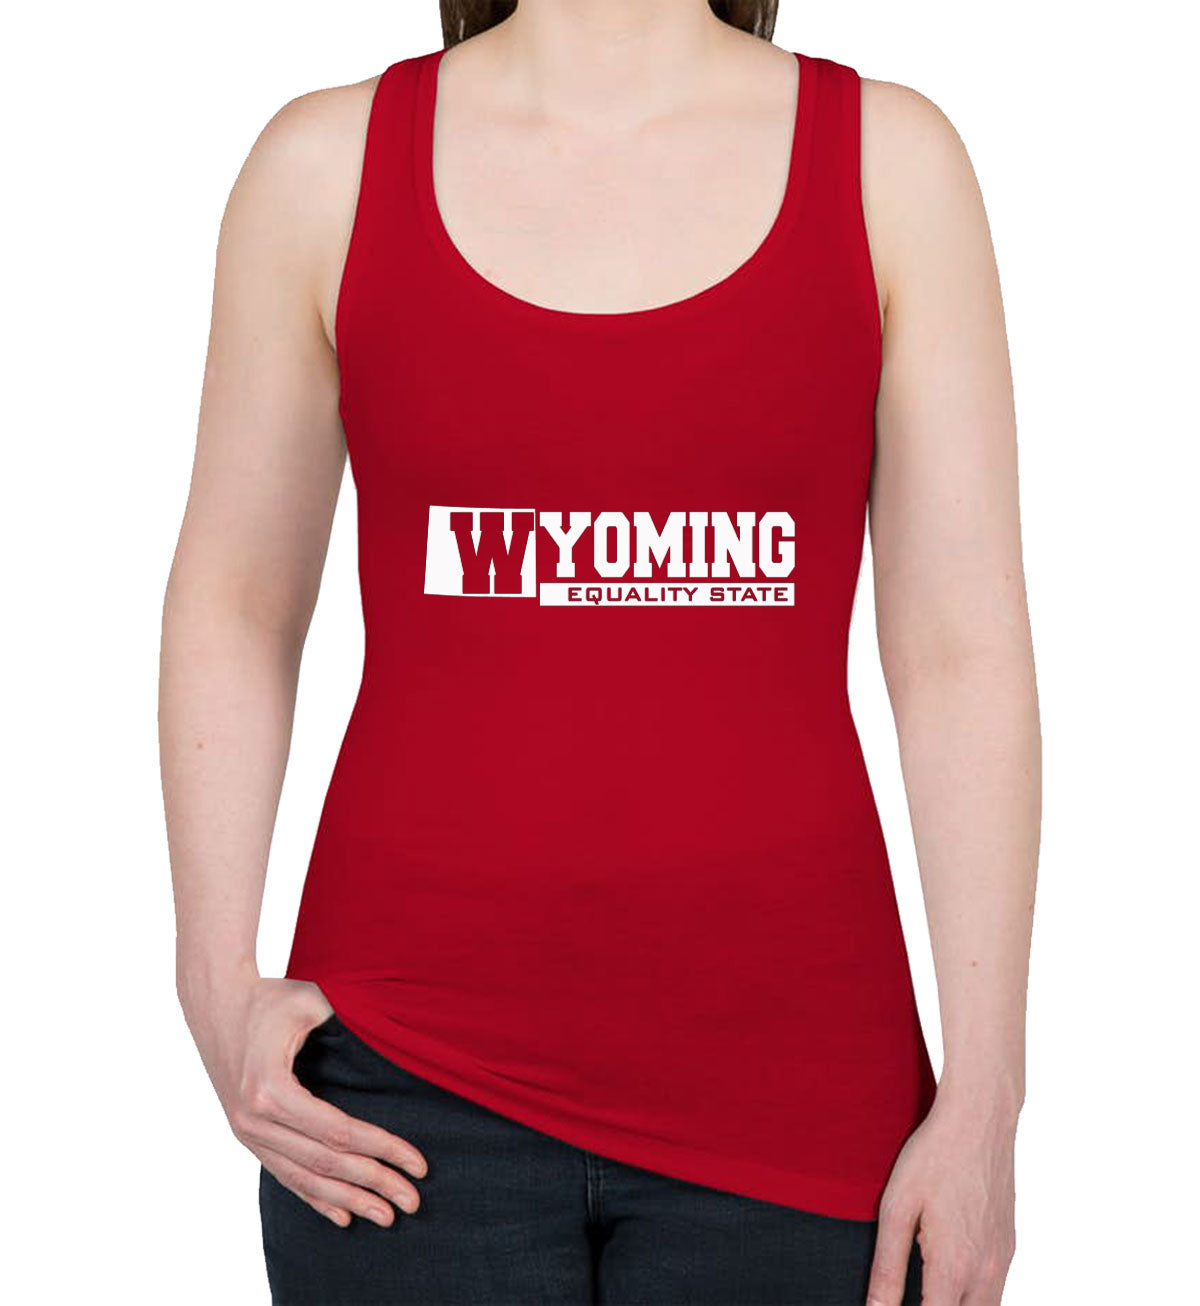 Wyoming Equality State Women's Racerback Tank Top